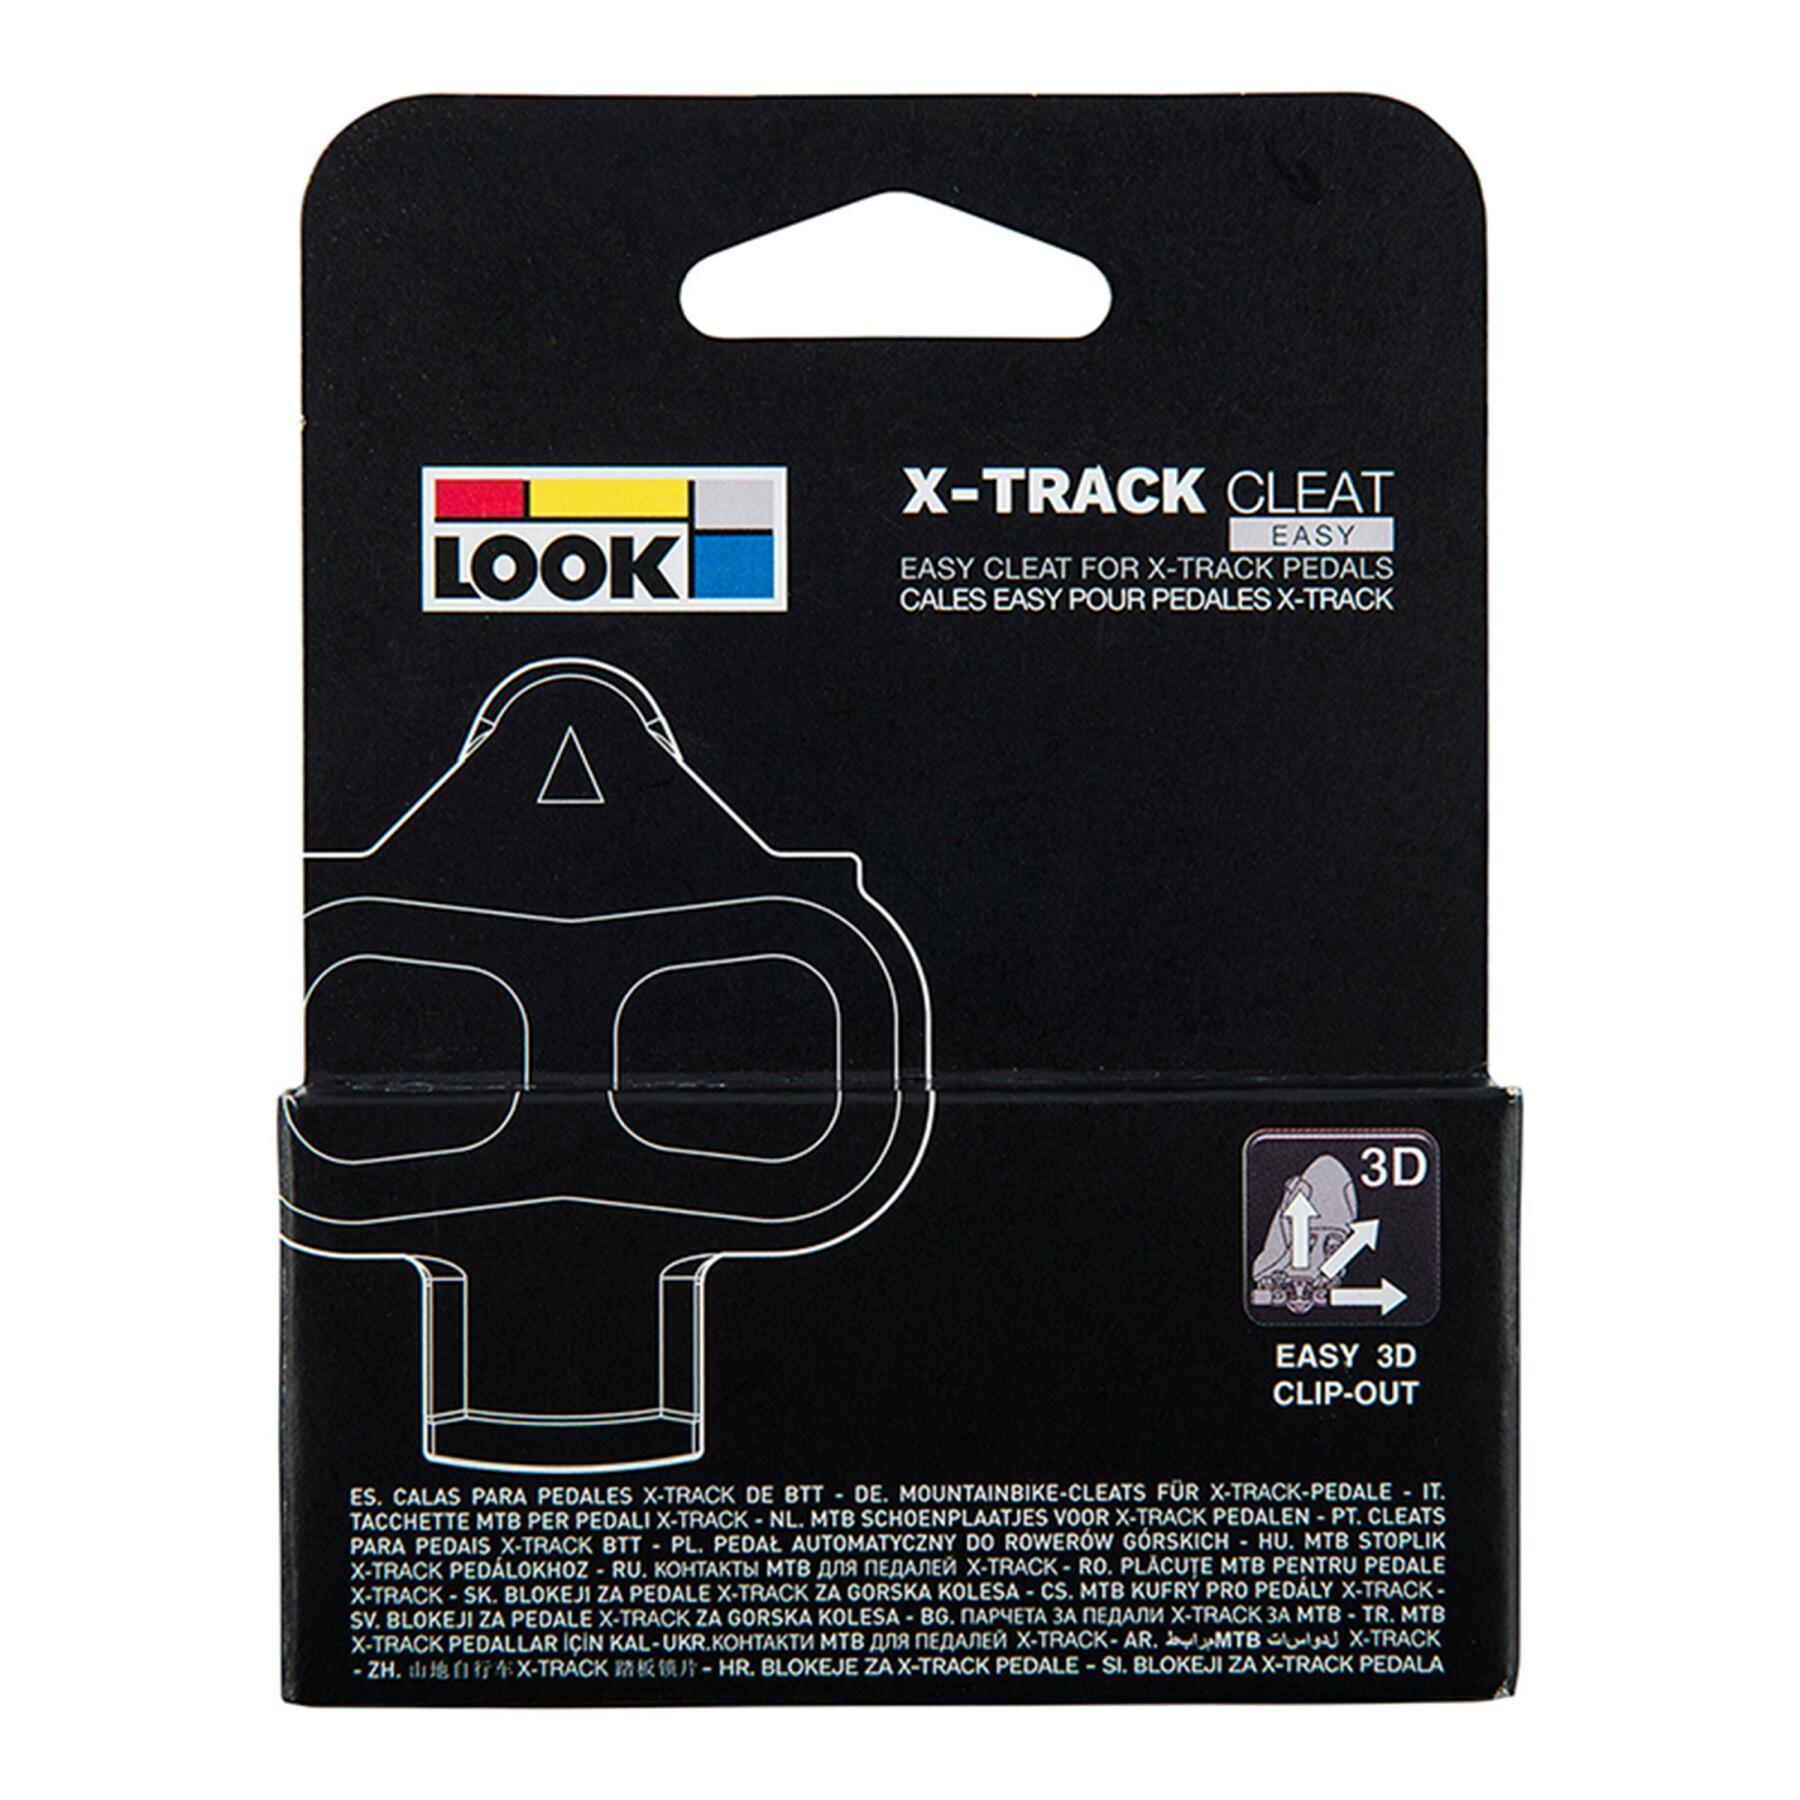 Cunho do pedal Look X-track easy